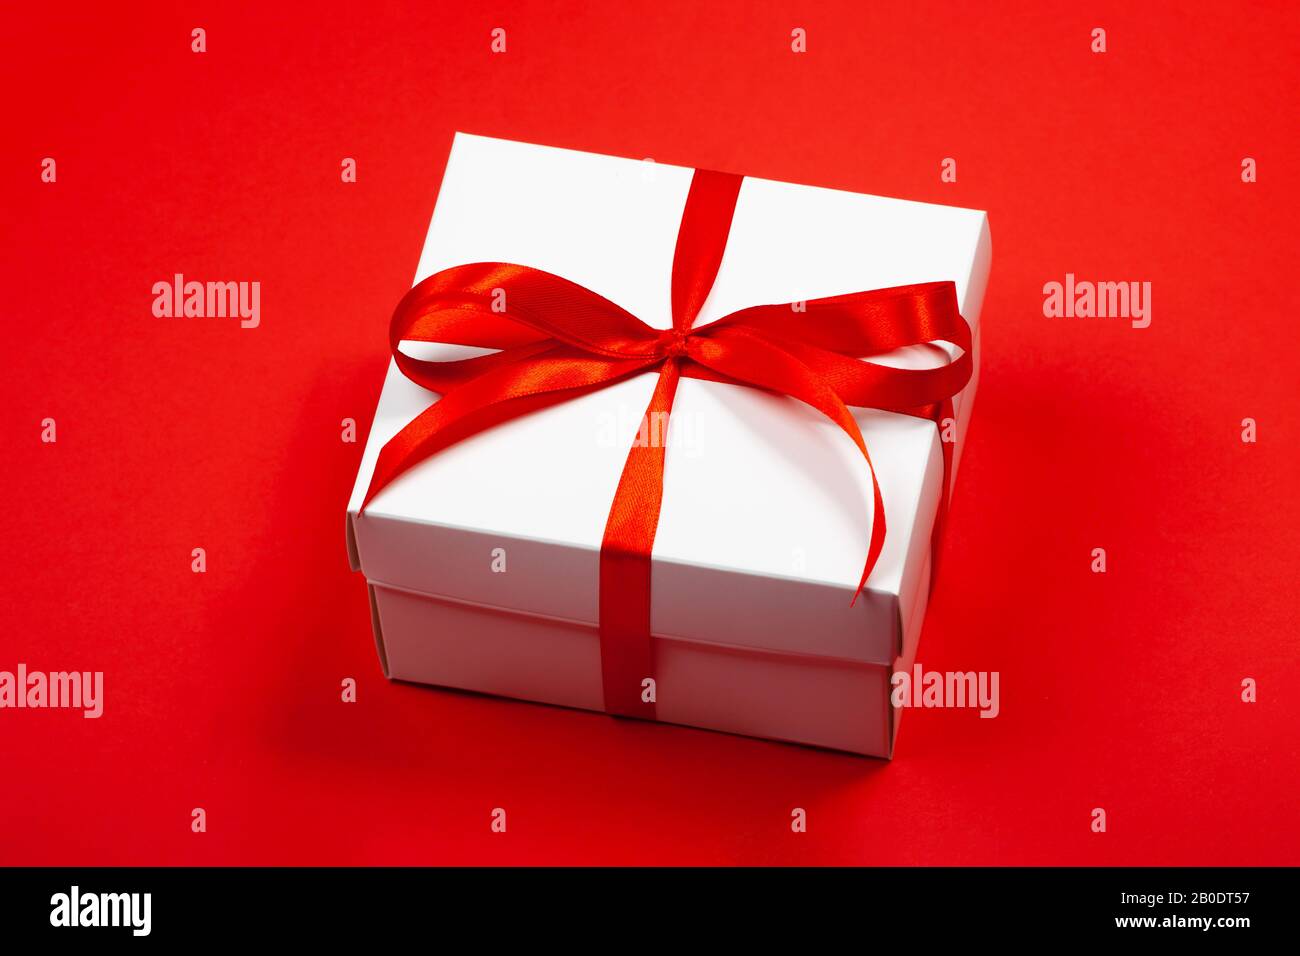 Trendy attractive minimalistic gift on the red background. Women's Day, St. Valentine's Day, Happy Birthday and other holidays concept. Stock Photo